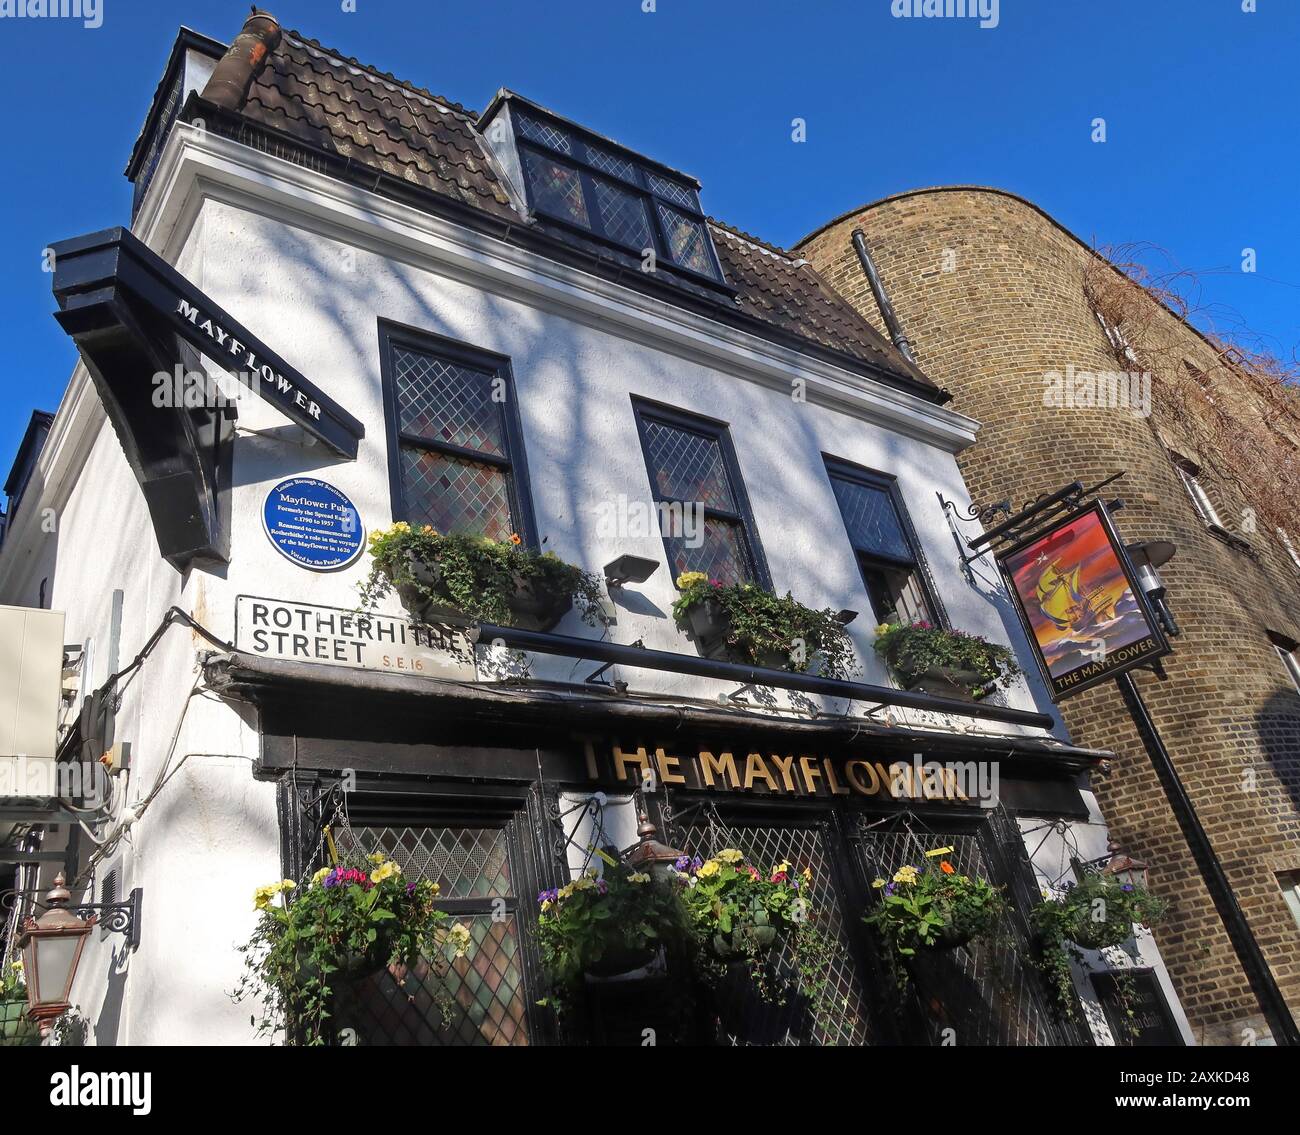 The Famous Mayflower Pub, Rotherhithe, Bermondsey, London, next to the River Thames Stock Photo